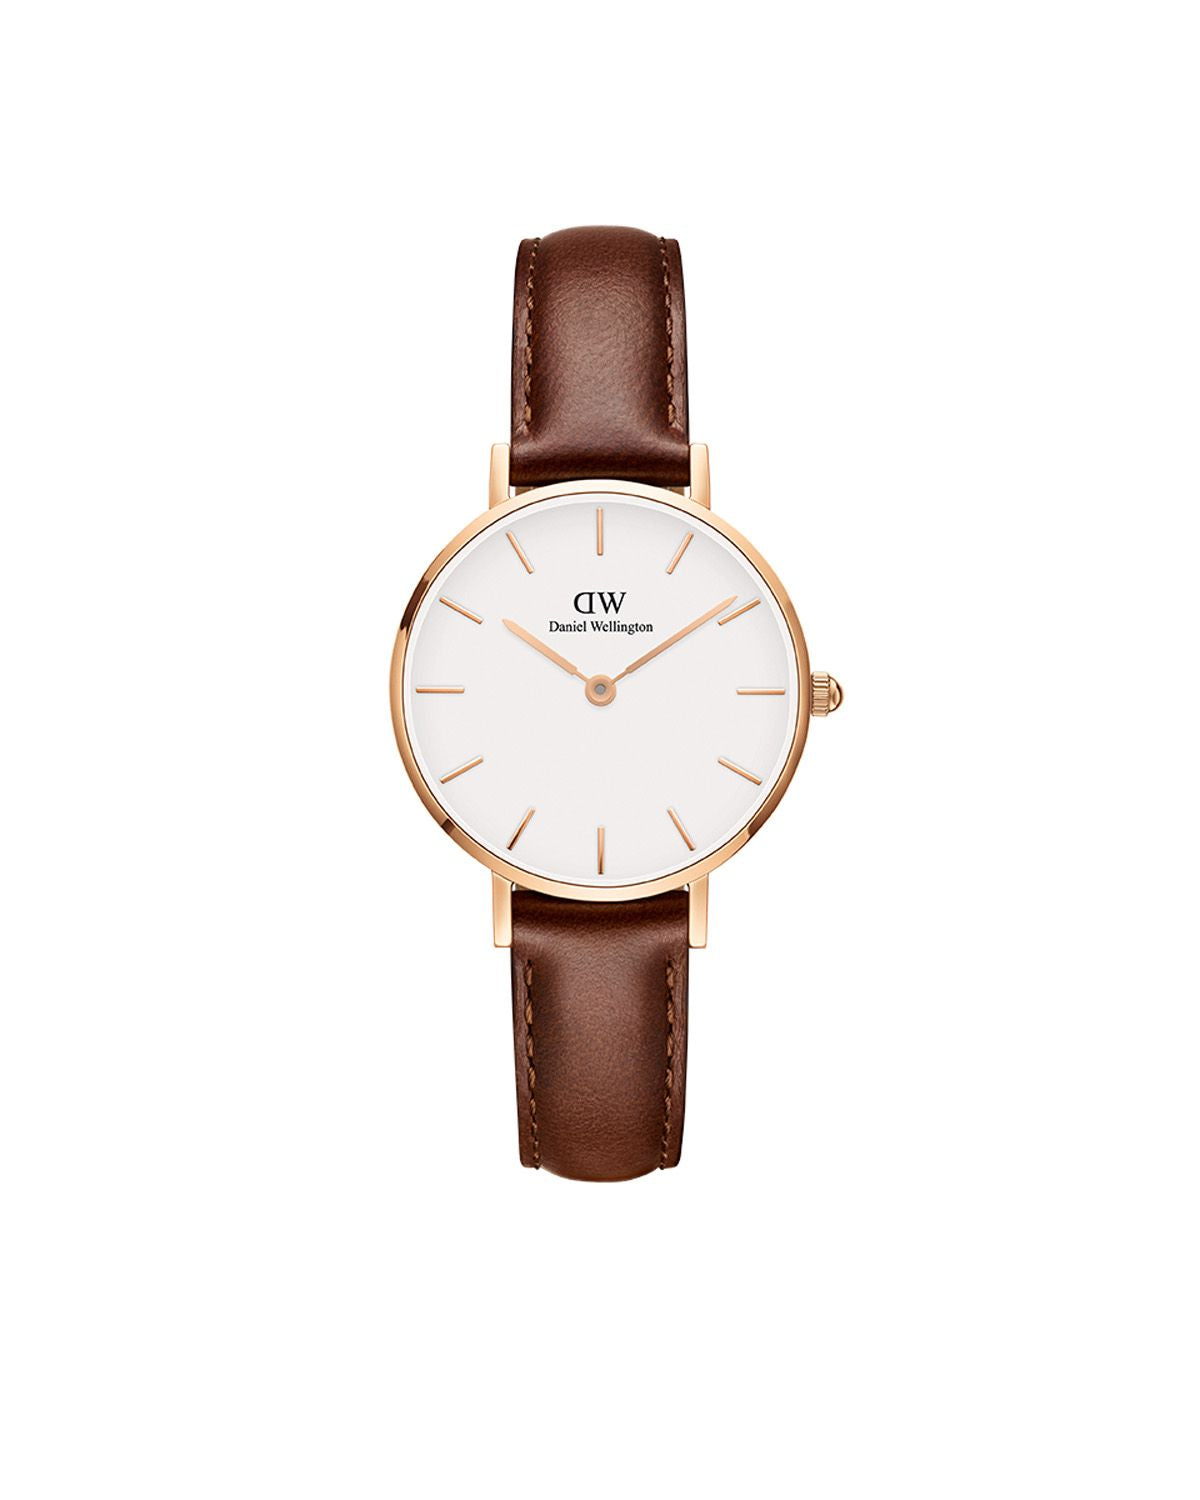 Daniel Wellington 'Petite ST Mawes' 28mm Rose and Brown Watch